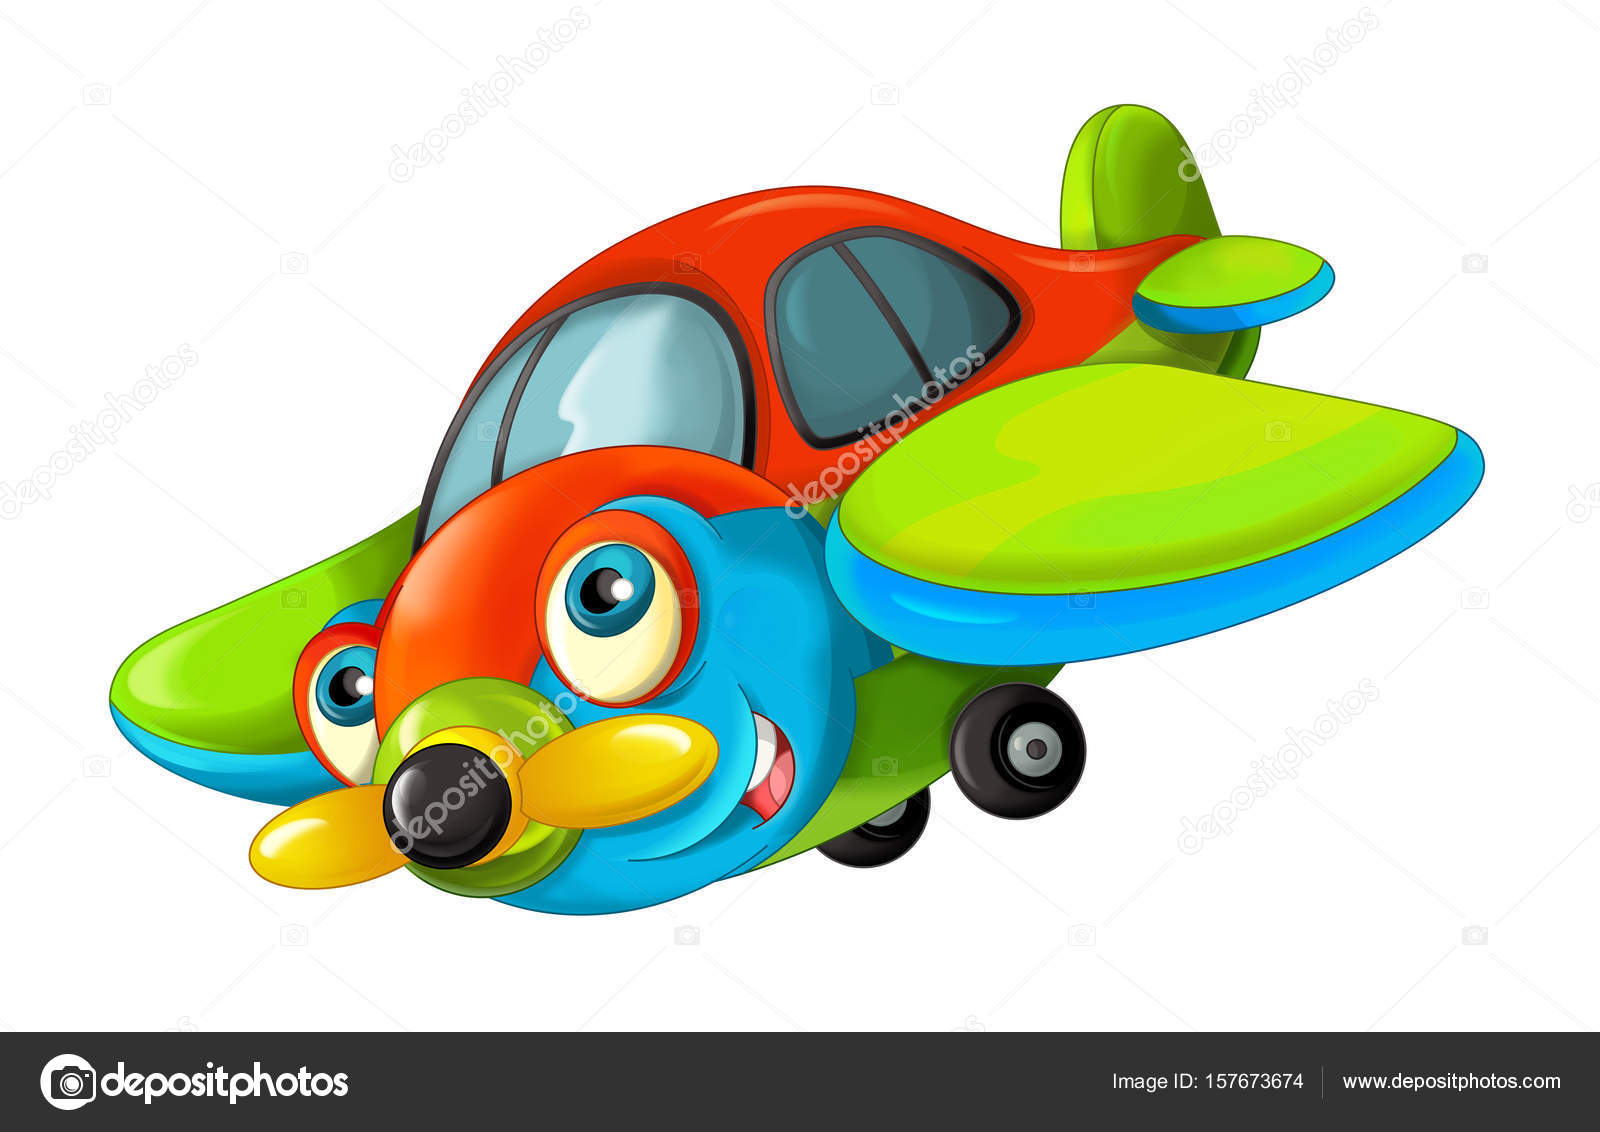 Traditional plane with propeller smiling and flying Stock Photo by  ©illustrator_hft 157673674